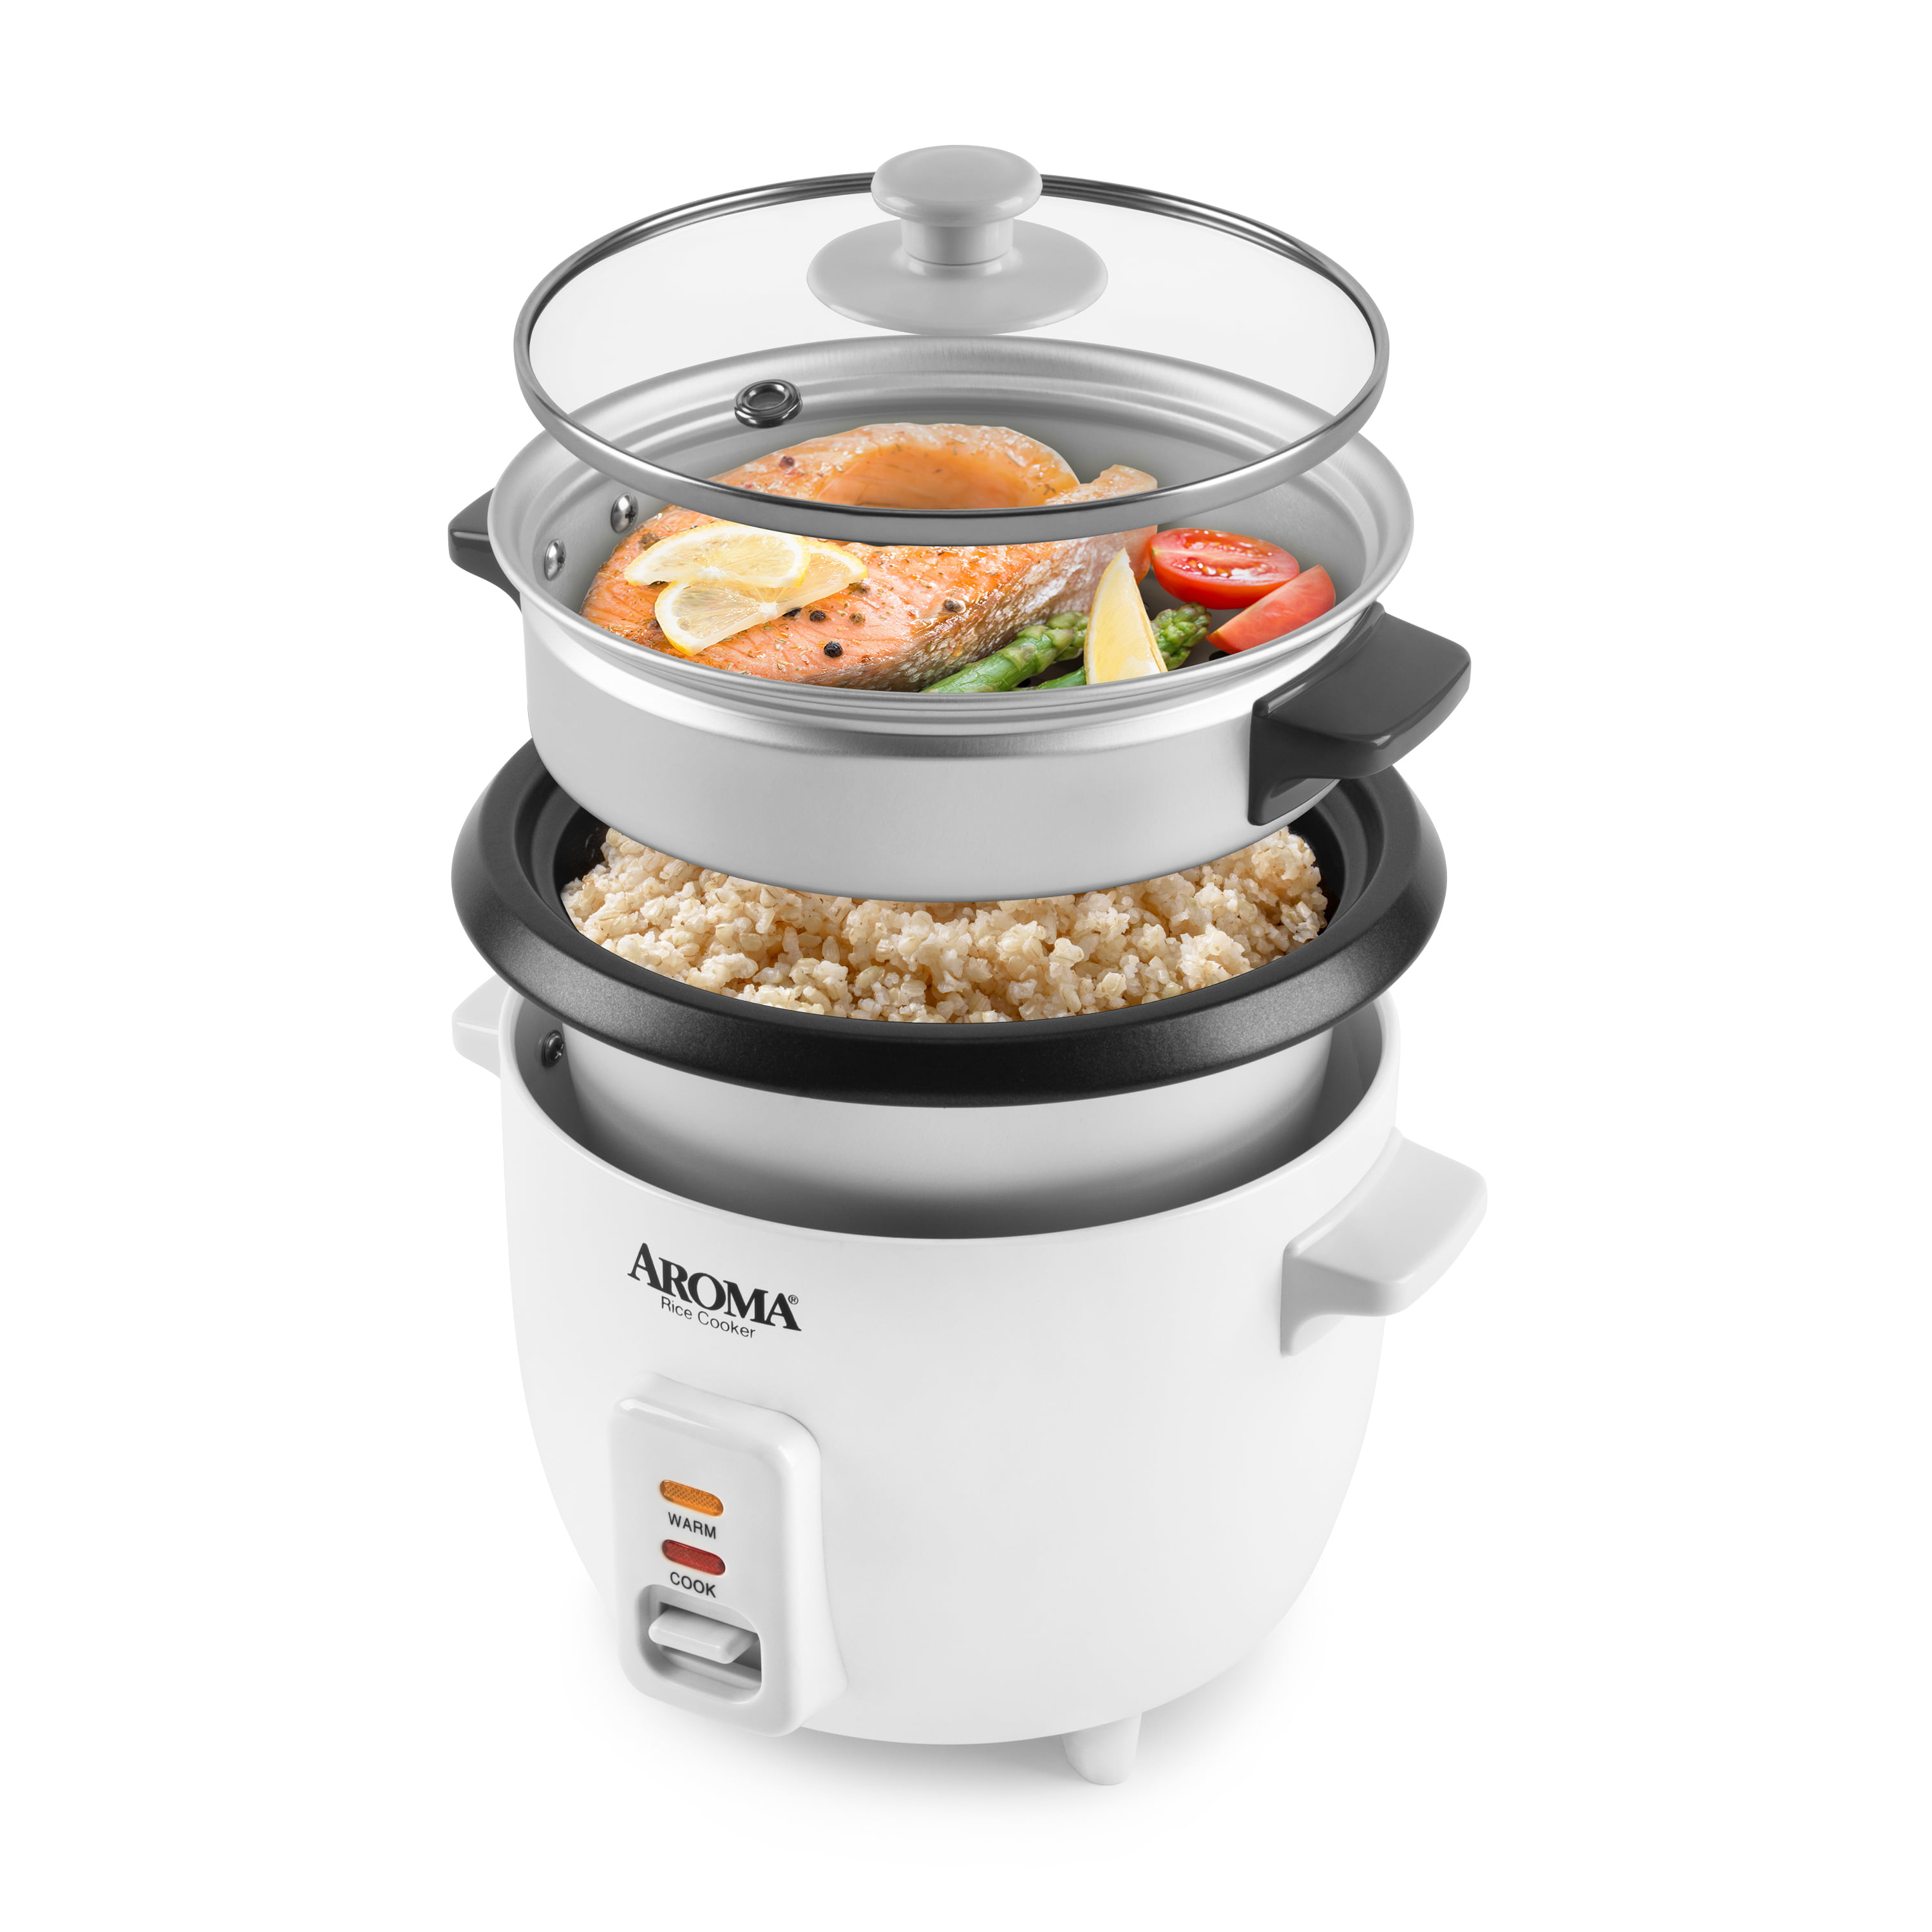 Aroma Rice Cooker 6 Cup Non-Stick Pot Style White, 3 Piece